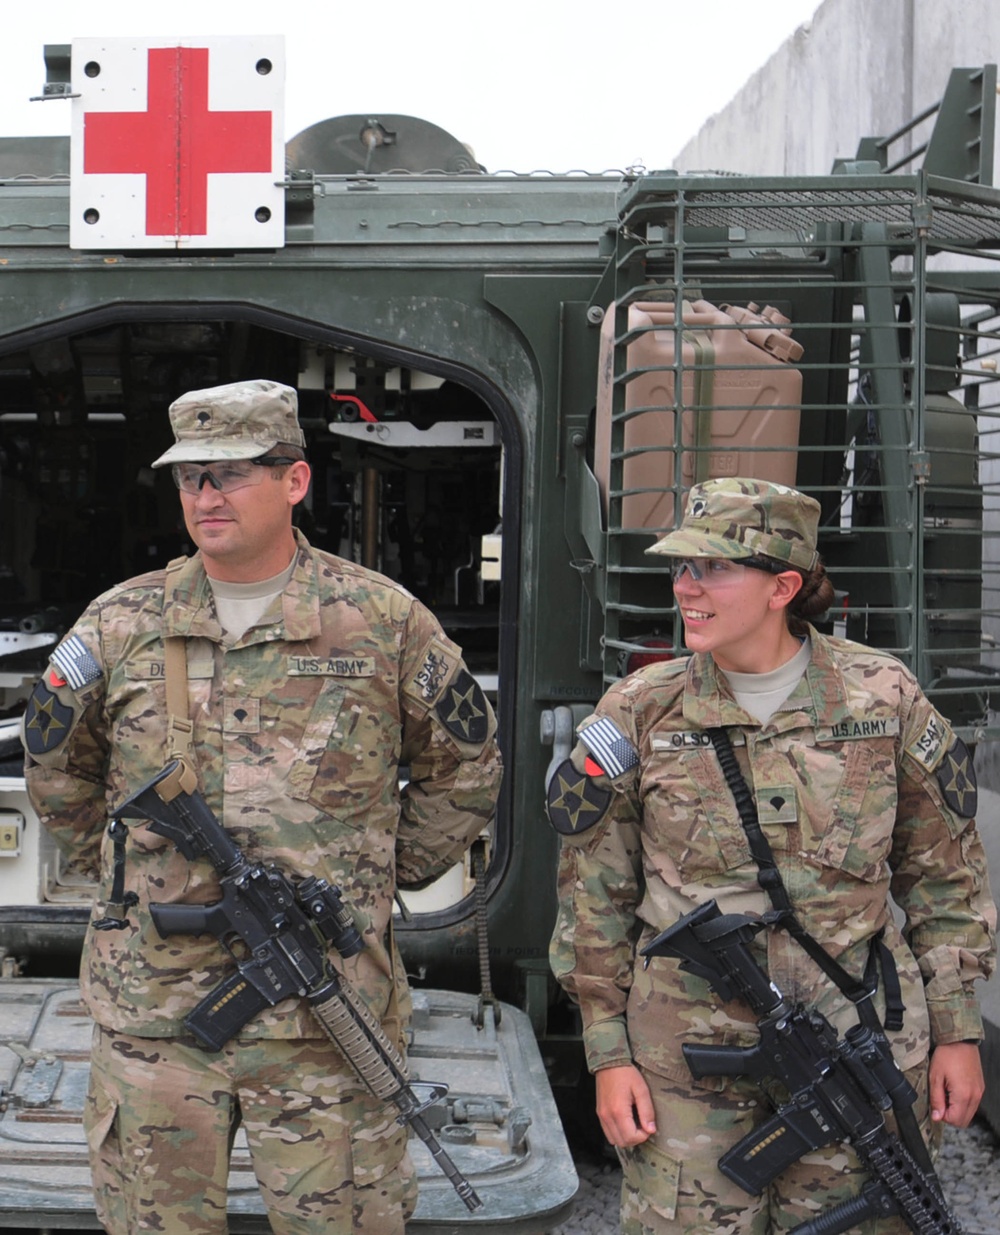 Compassionate care - the tale of two combat medics